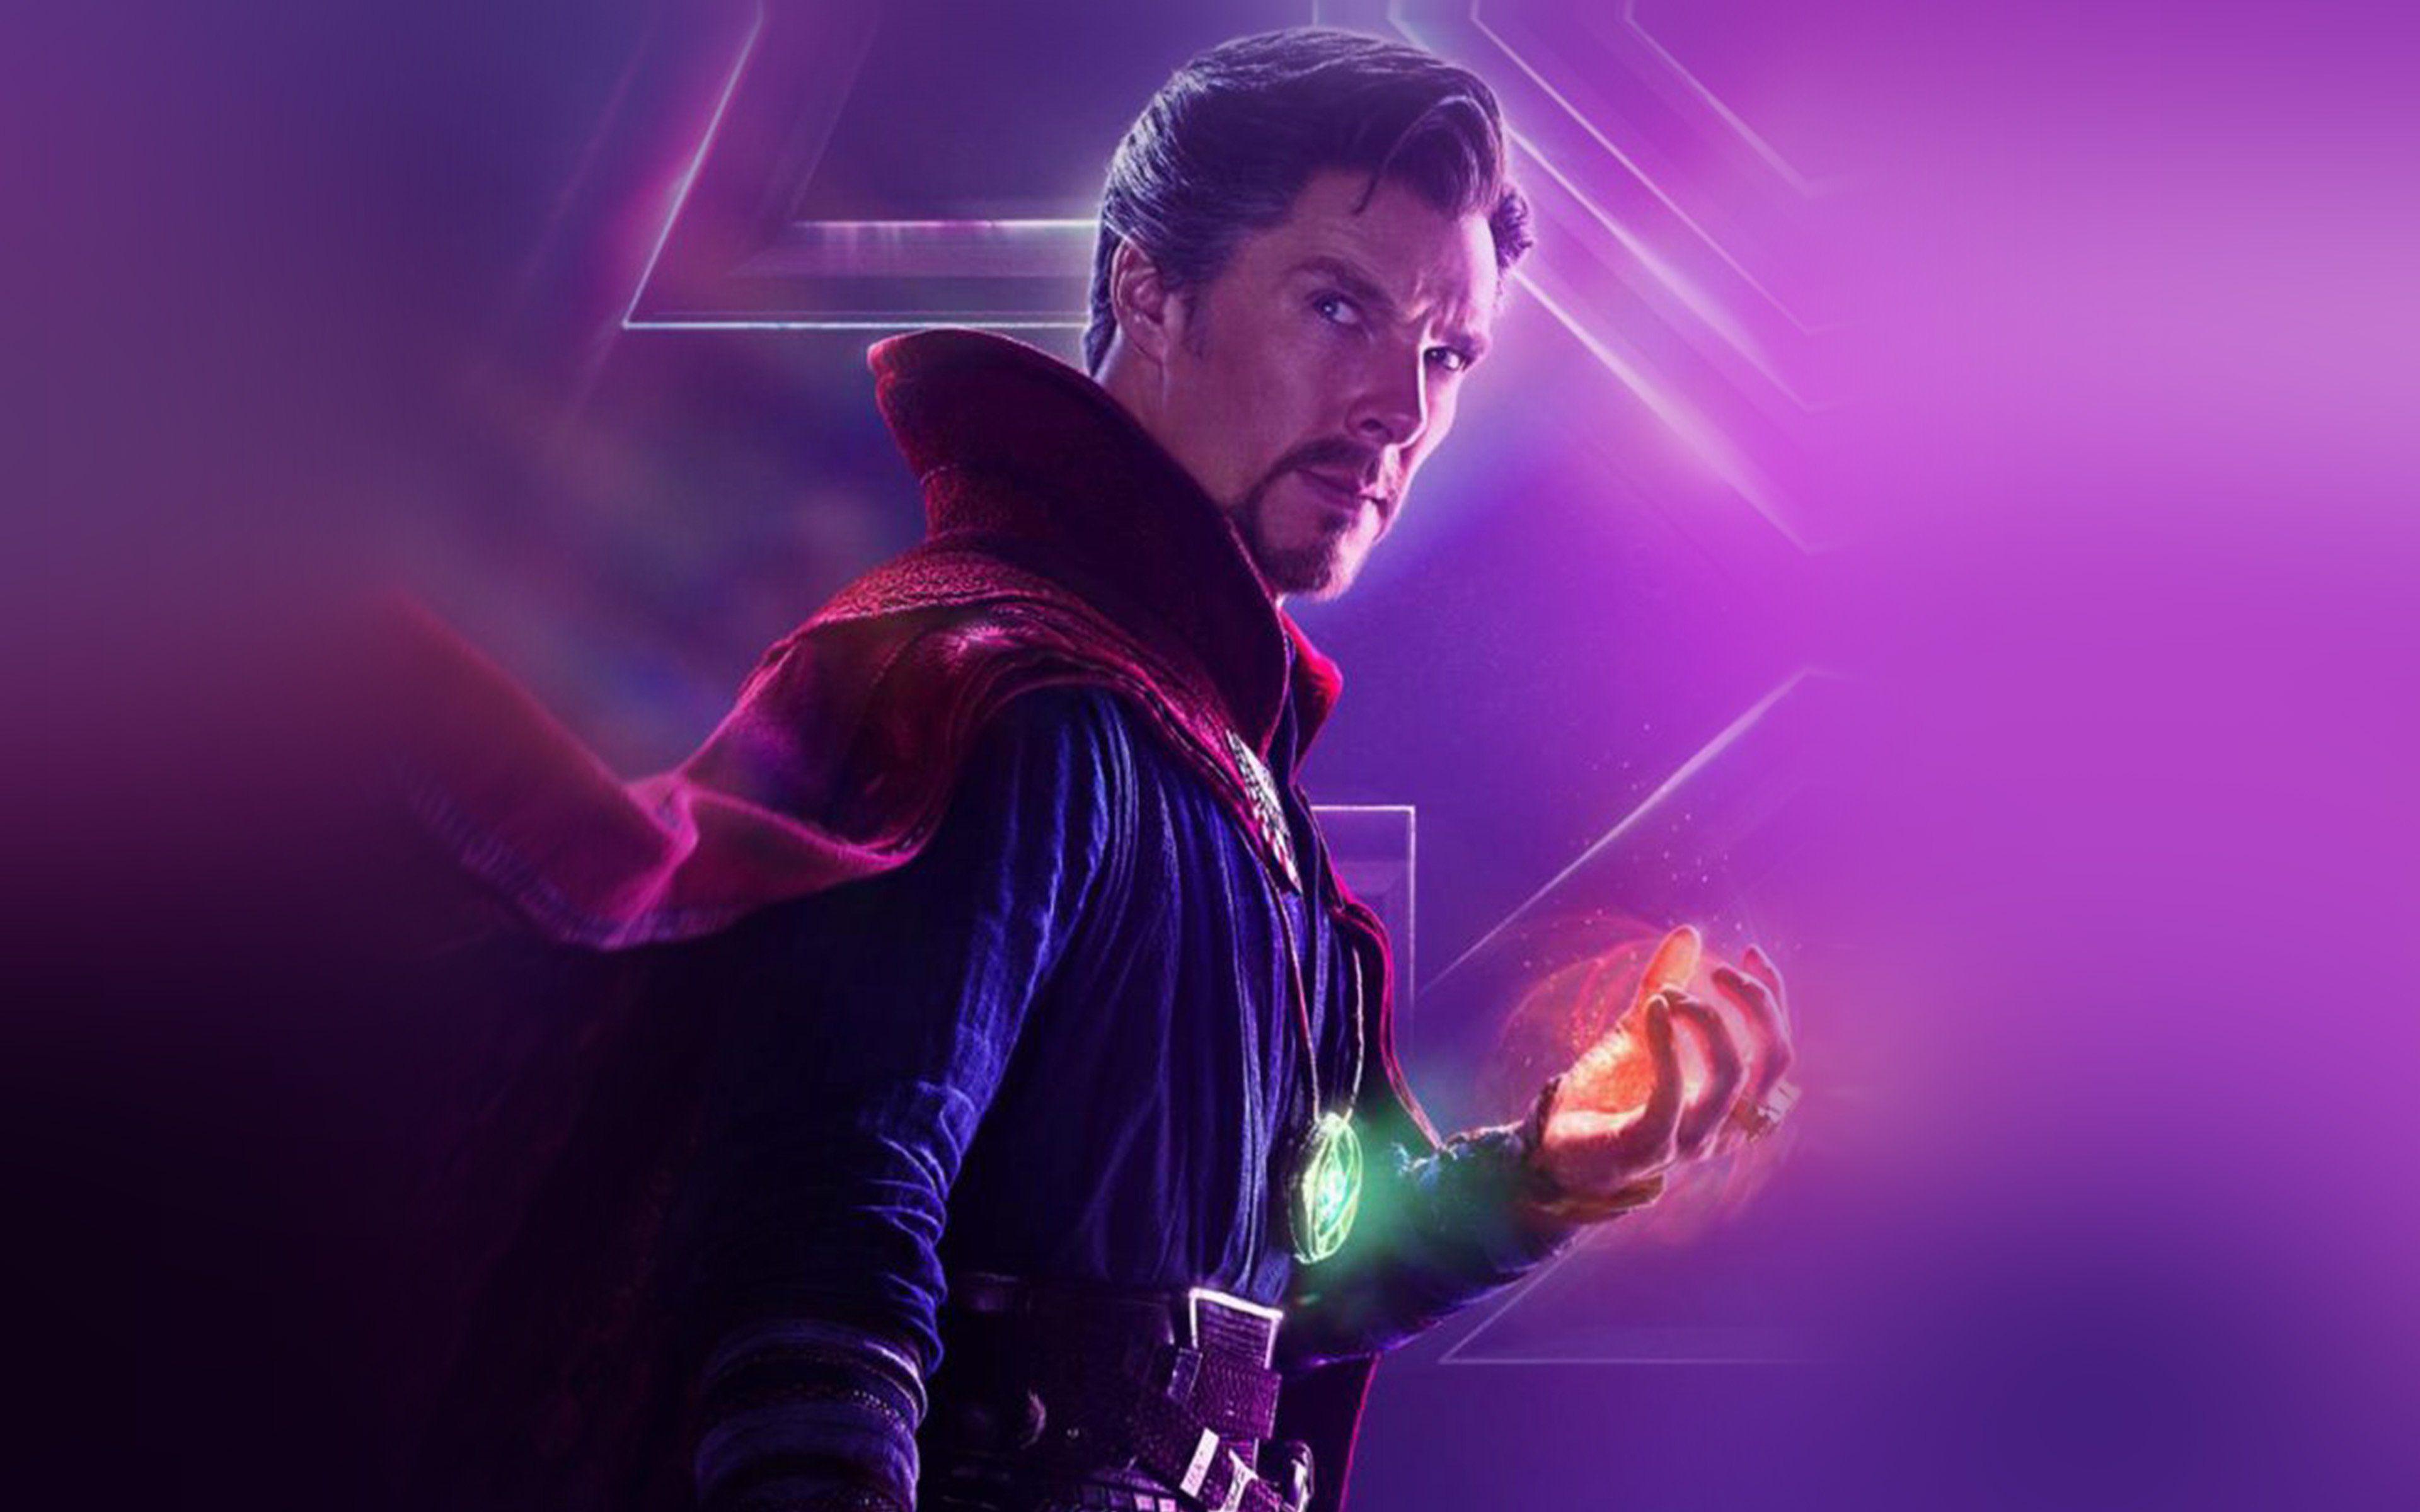 Featured image of post Doctor Strange Laptop Wallpaper Download 720x1280 wallpaper doctor strange marvel artwork minimal samsung galaxy mini s3 s5 neo alpha sony xperia compact z1 z2 z3 asus zenfone 720x1280 hd image background 227